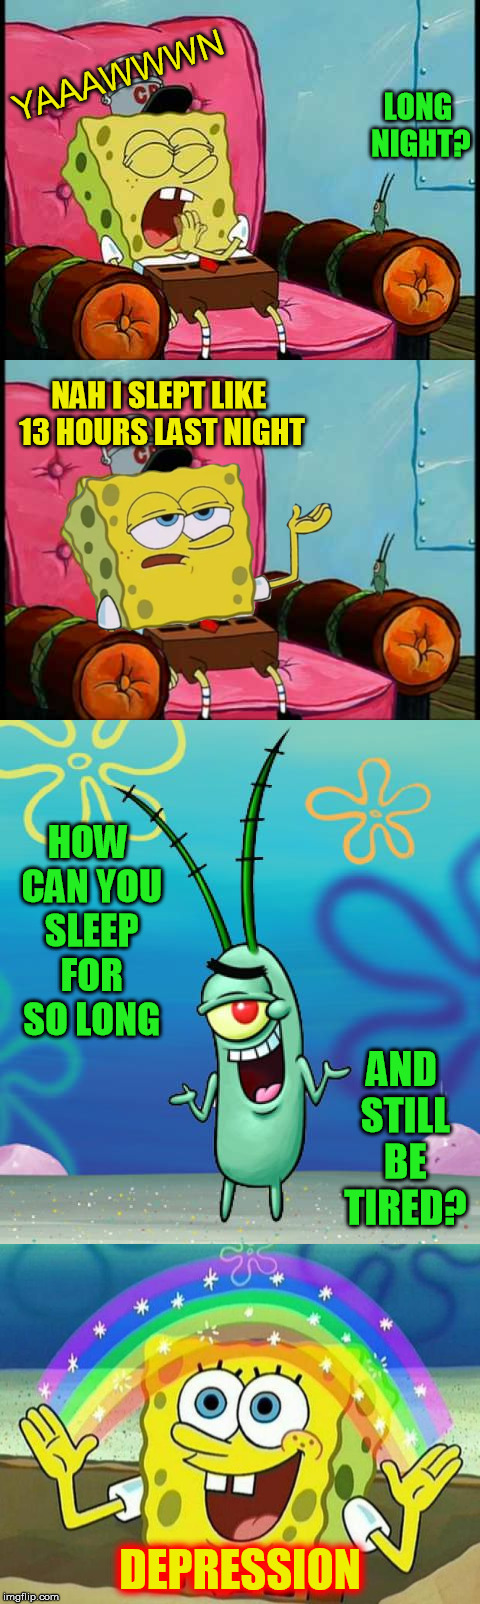 Stress, stress everywhere | YAAAWWWN; LONG NIGHT? NAH I SLEPT LIKE 13 HOURS LAST NIGHT; HOW CAN YOU SLEEP FOR SO LONG; AND STILL BE TIRED? DEPRESSION | image tagged in spongebob,plankton,tired spongebob,depression,yawn,meme | made w/ Imgflip meme maker